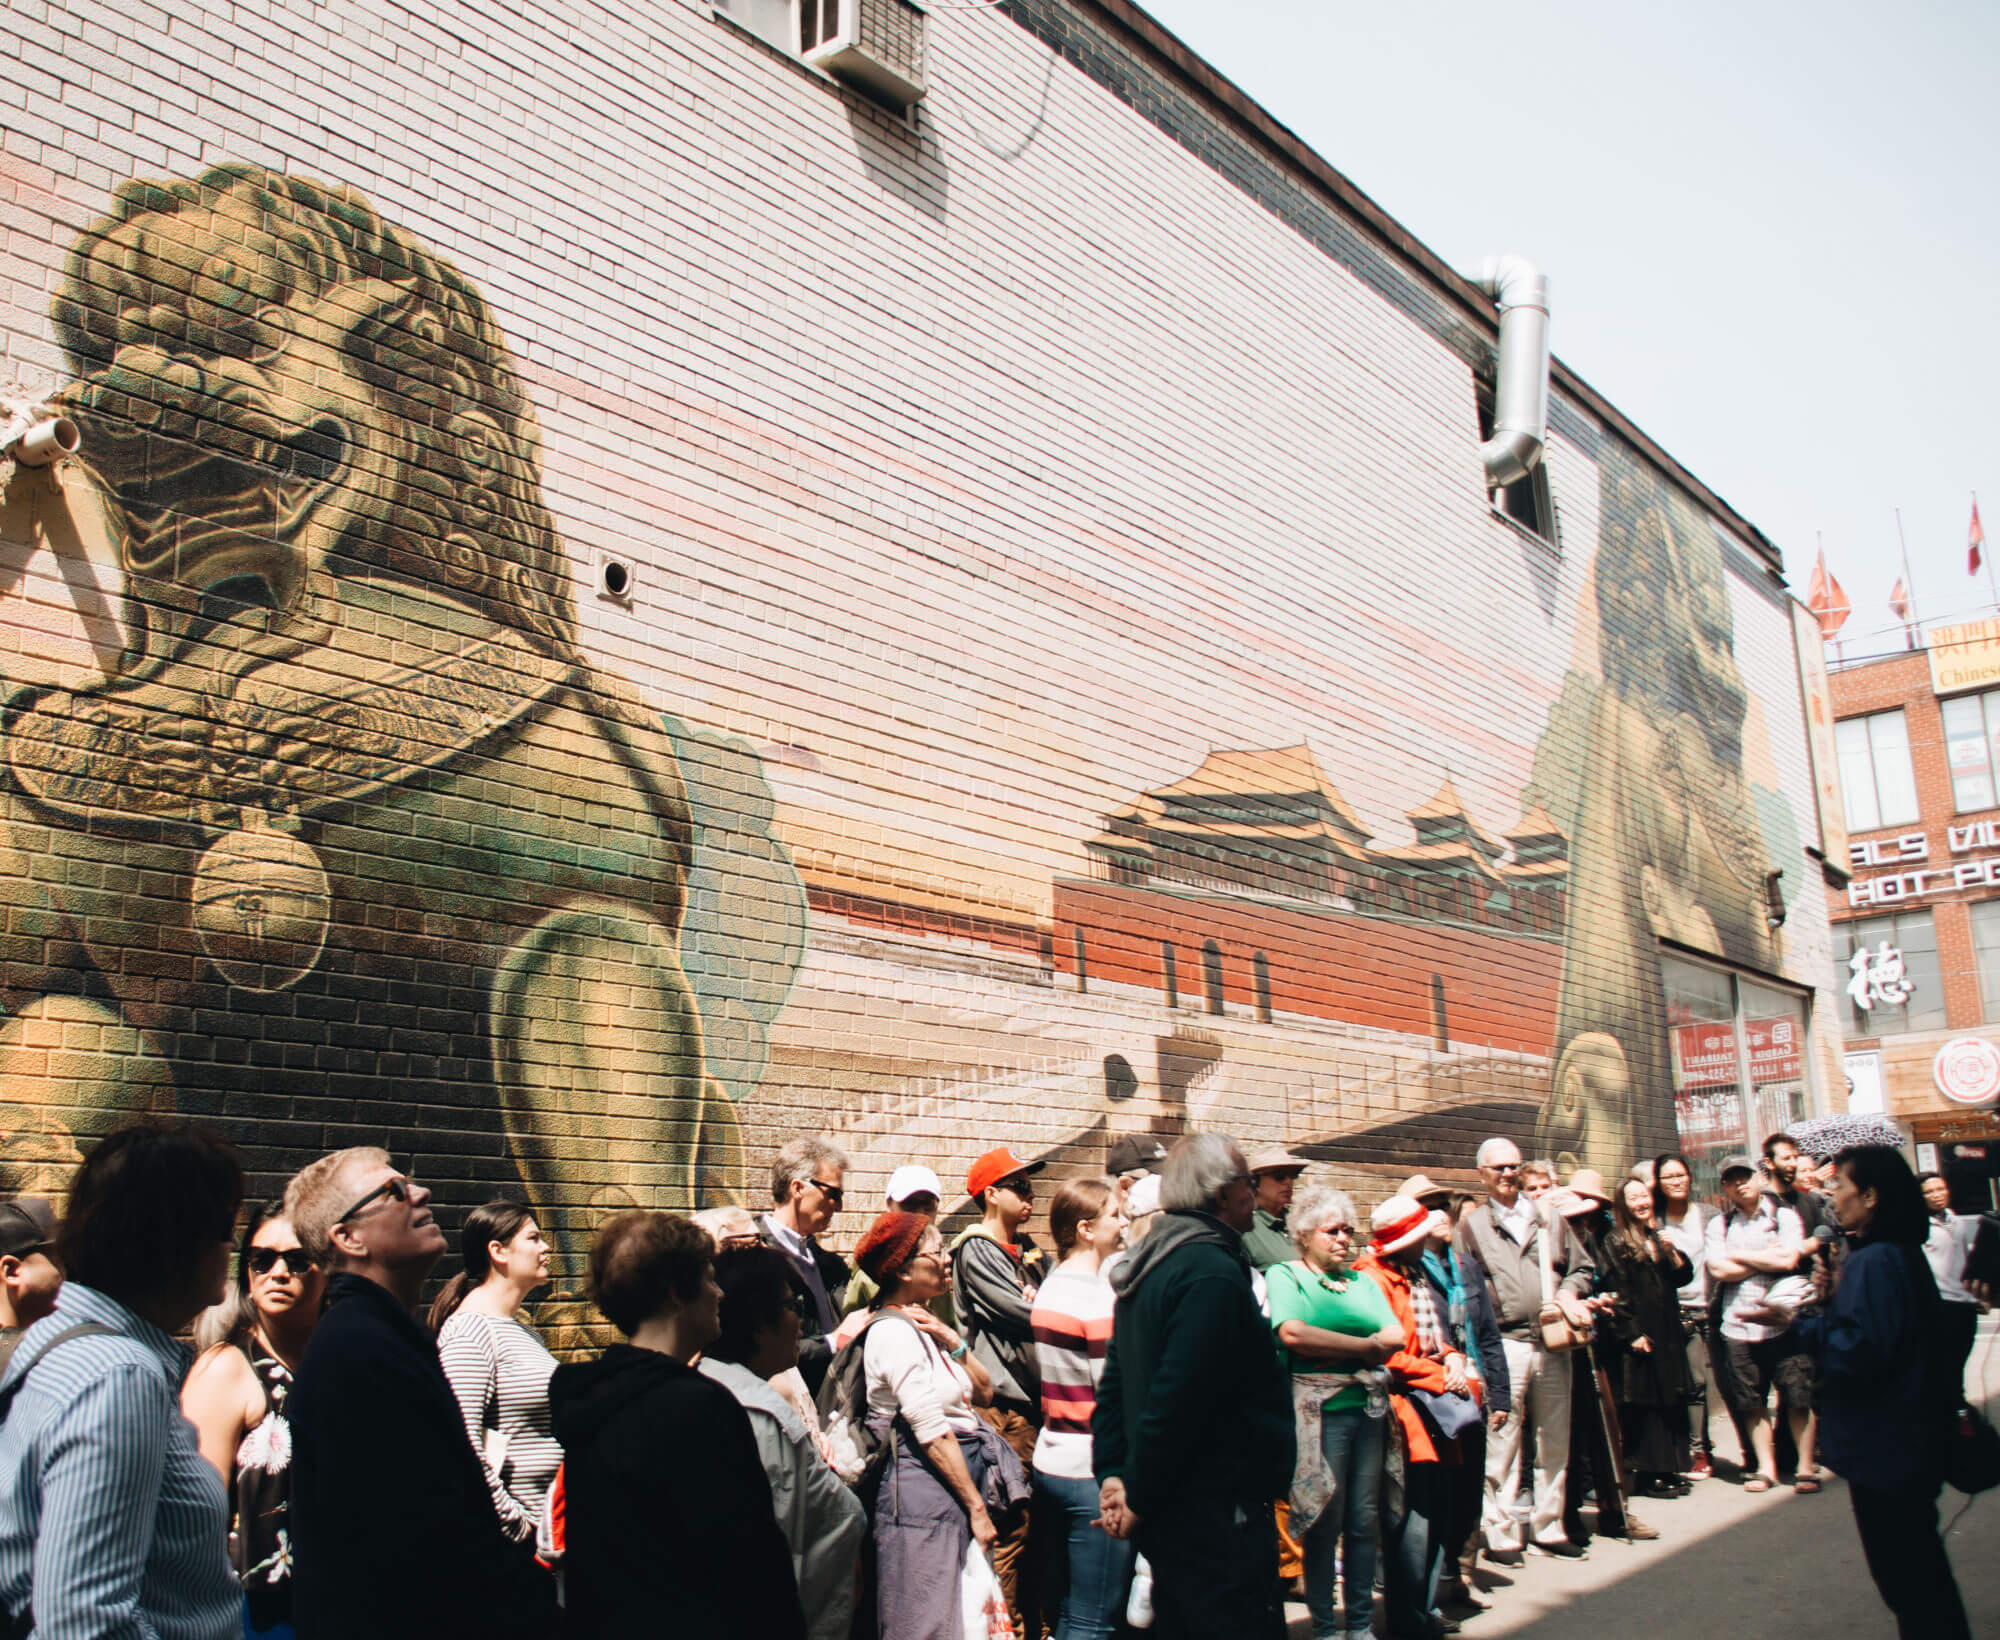 Group stands in alleyway in front of dragon mural listening to tour leader speak.